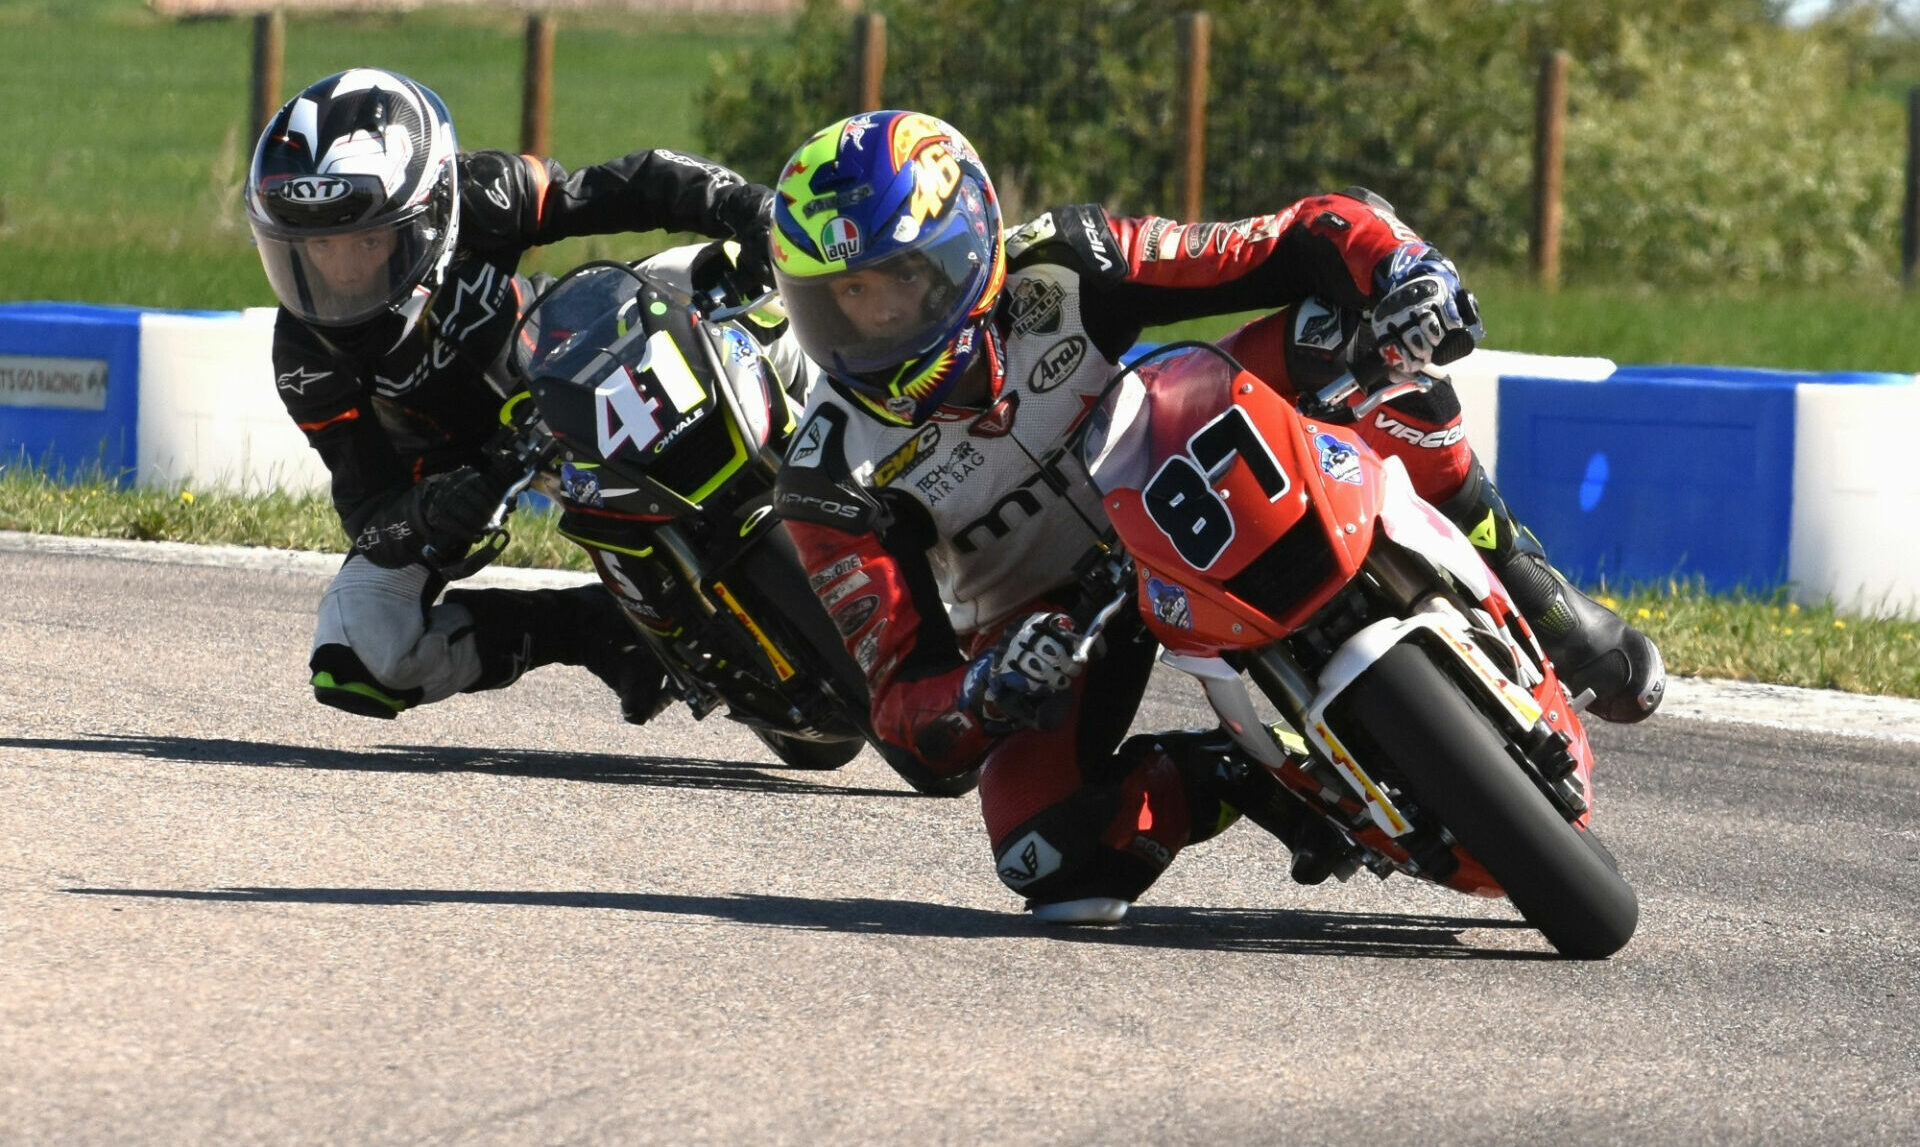 Rhys McNutt (87) and 41 Lincoln Scott (41) race for position during an FIM MiniGP Canada event at Greg Moore Raceway, in British Columbia, Canada. Photo by Colin Fraser.